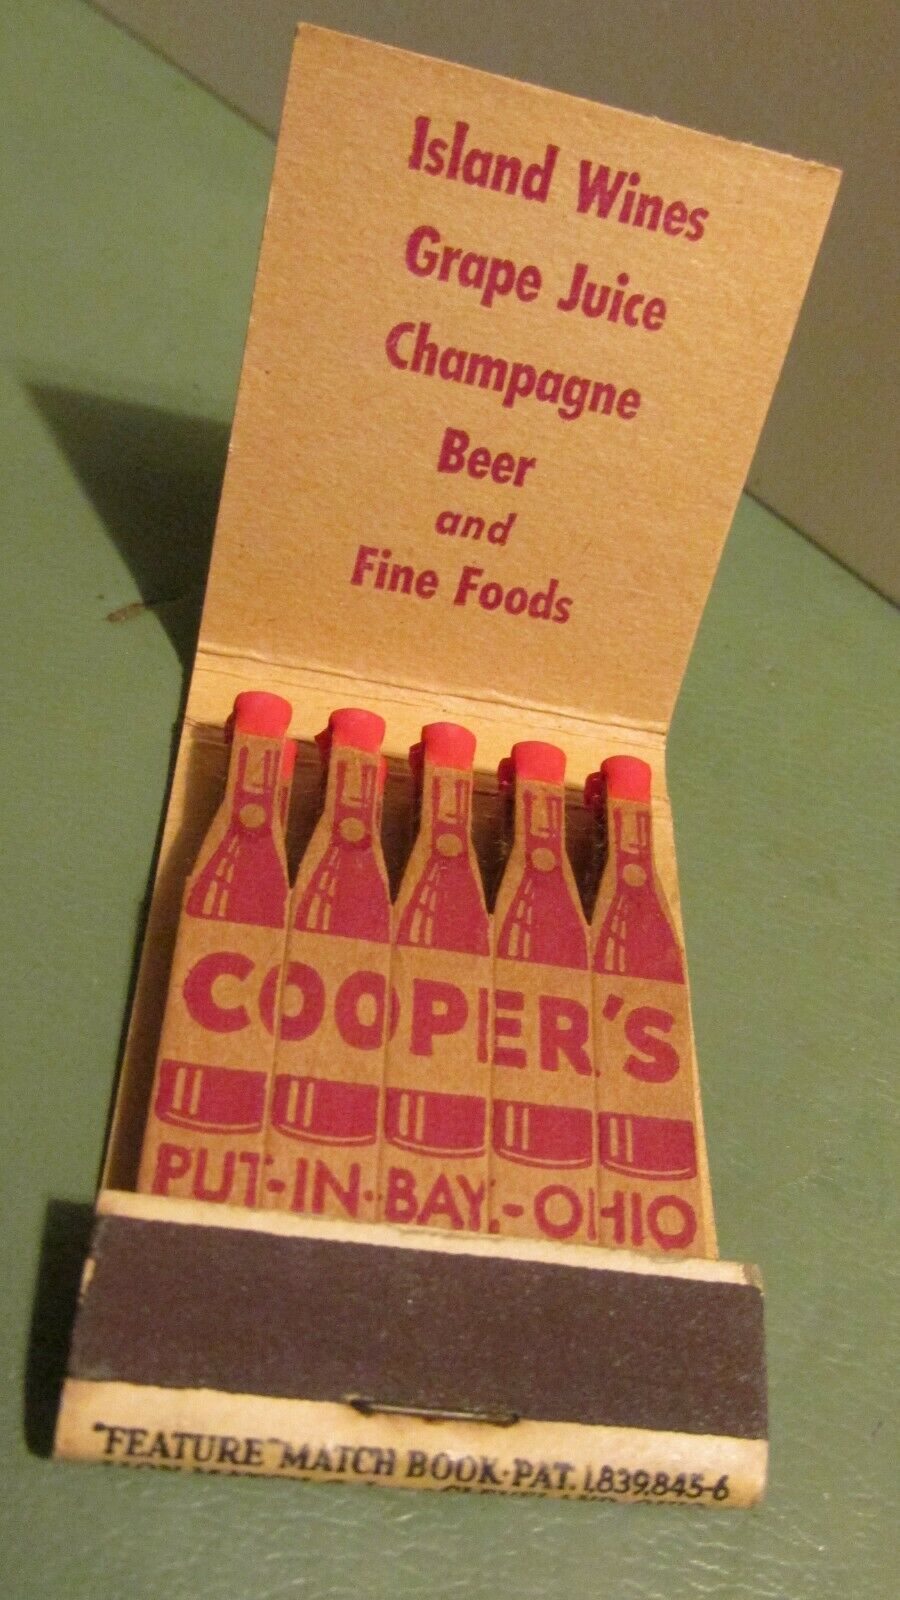 Put-in-bay Ohio - Vintage Matchbook With Matches For Cooper's Restaurant And Tav